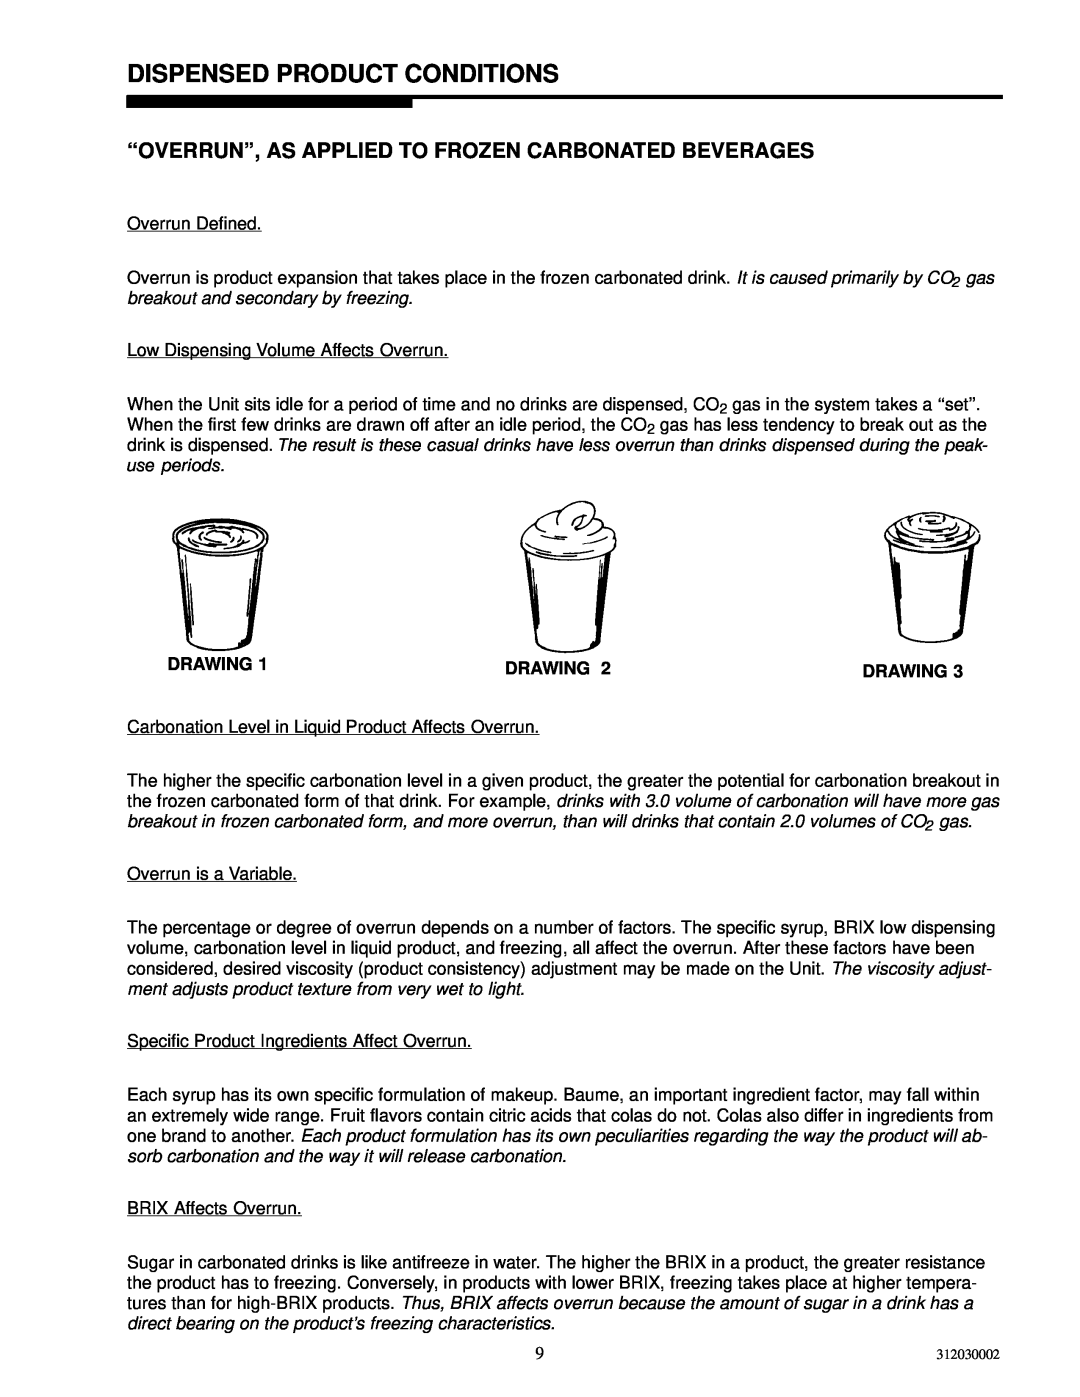 Cornelius R-404A manual Dispensed Product Conditions, ‘‘Overrun’’, As Applied To Frozen Carbonated Beverages 